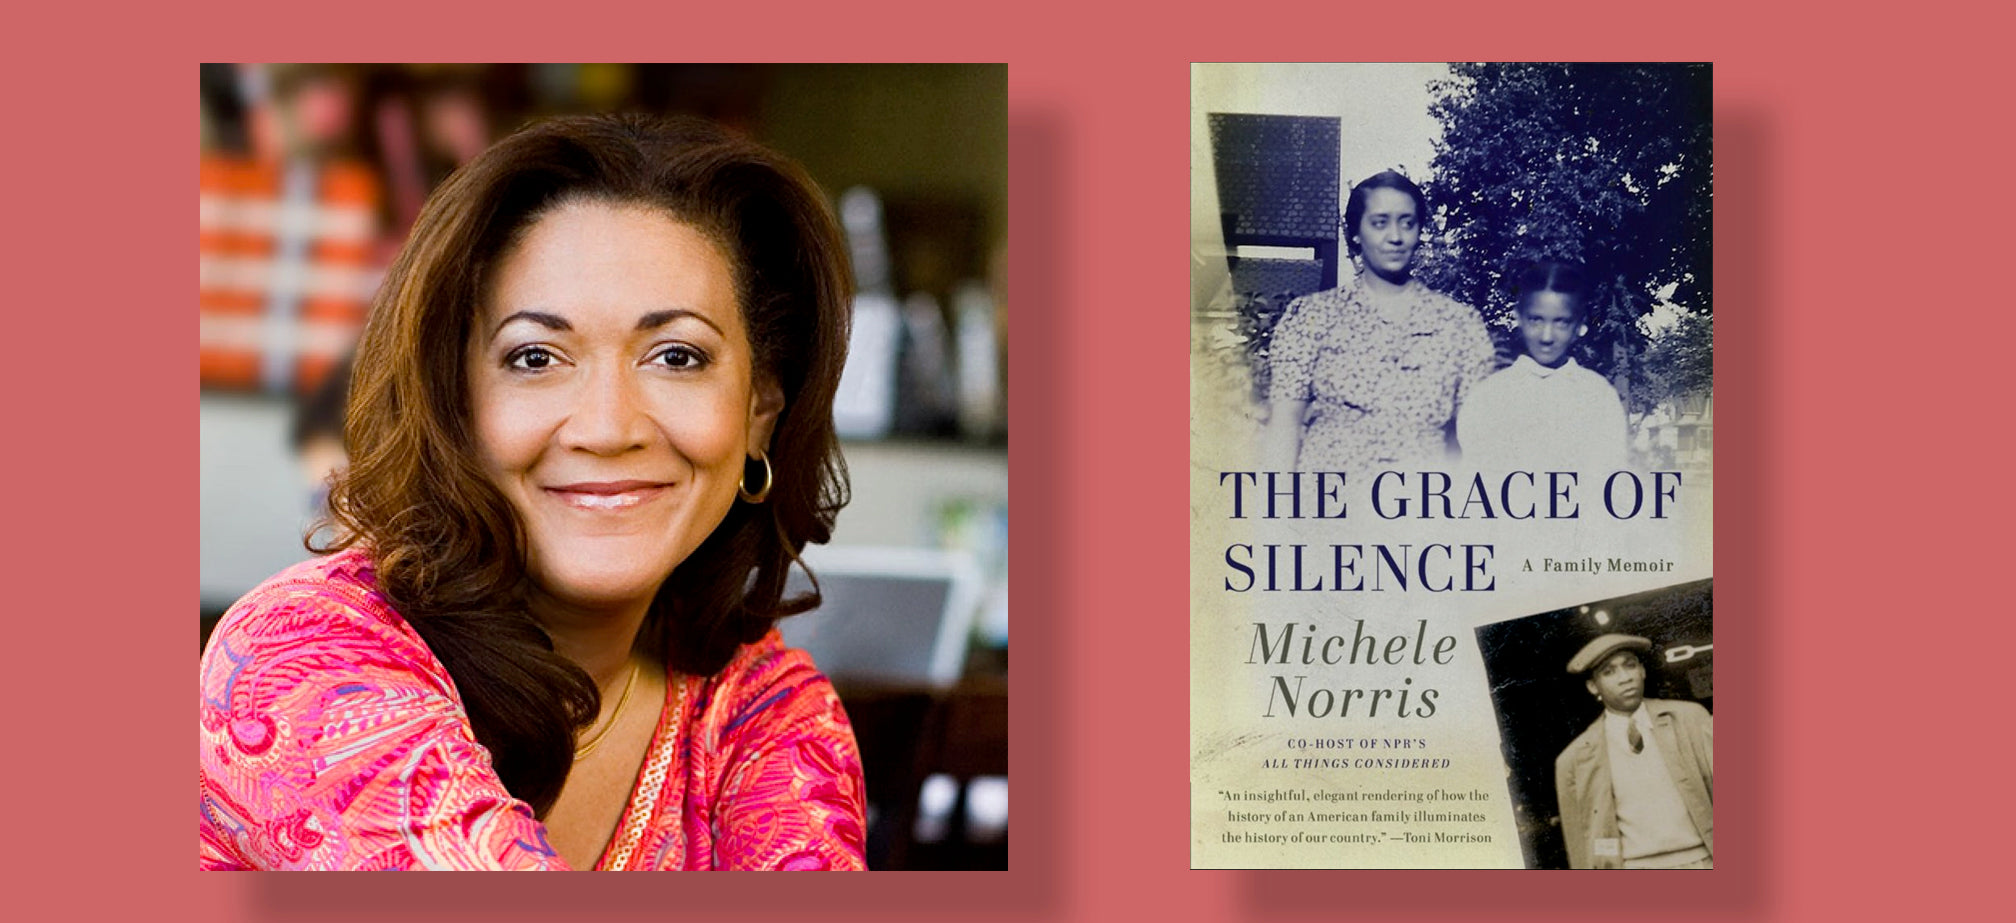 Book Review: The Grace of Silence by Michele Norris